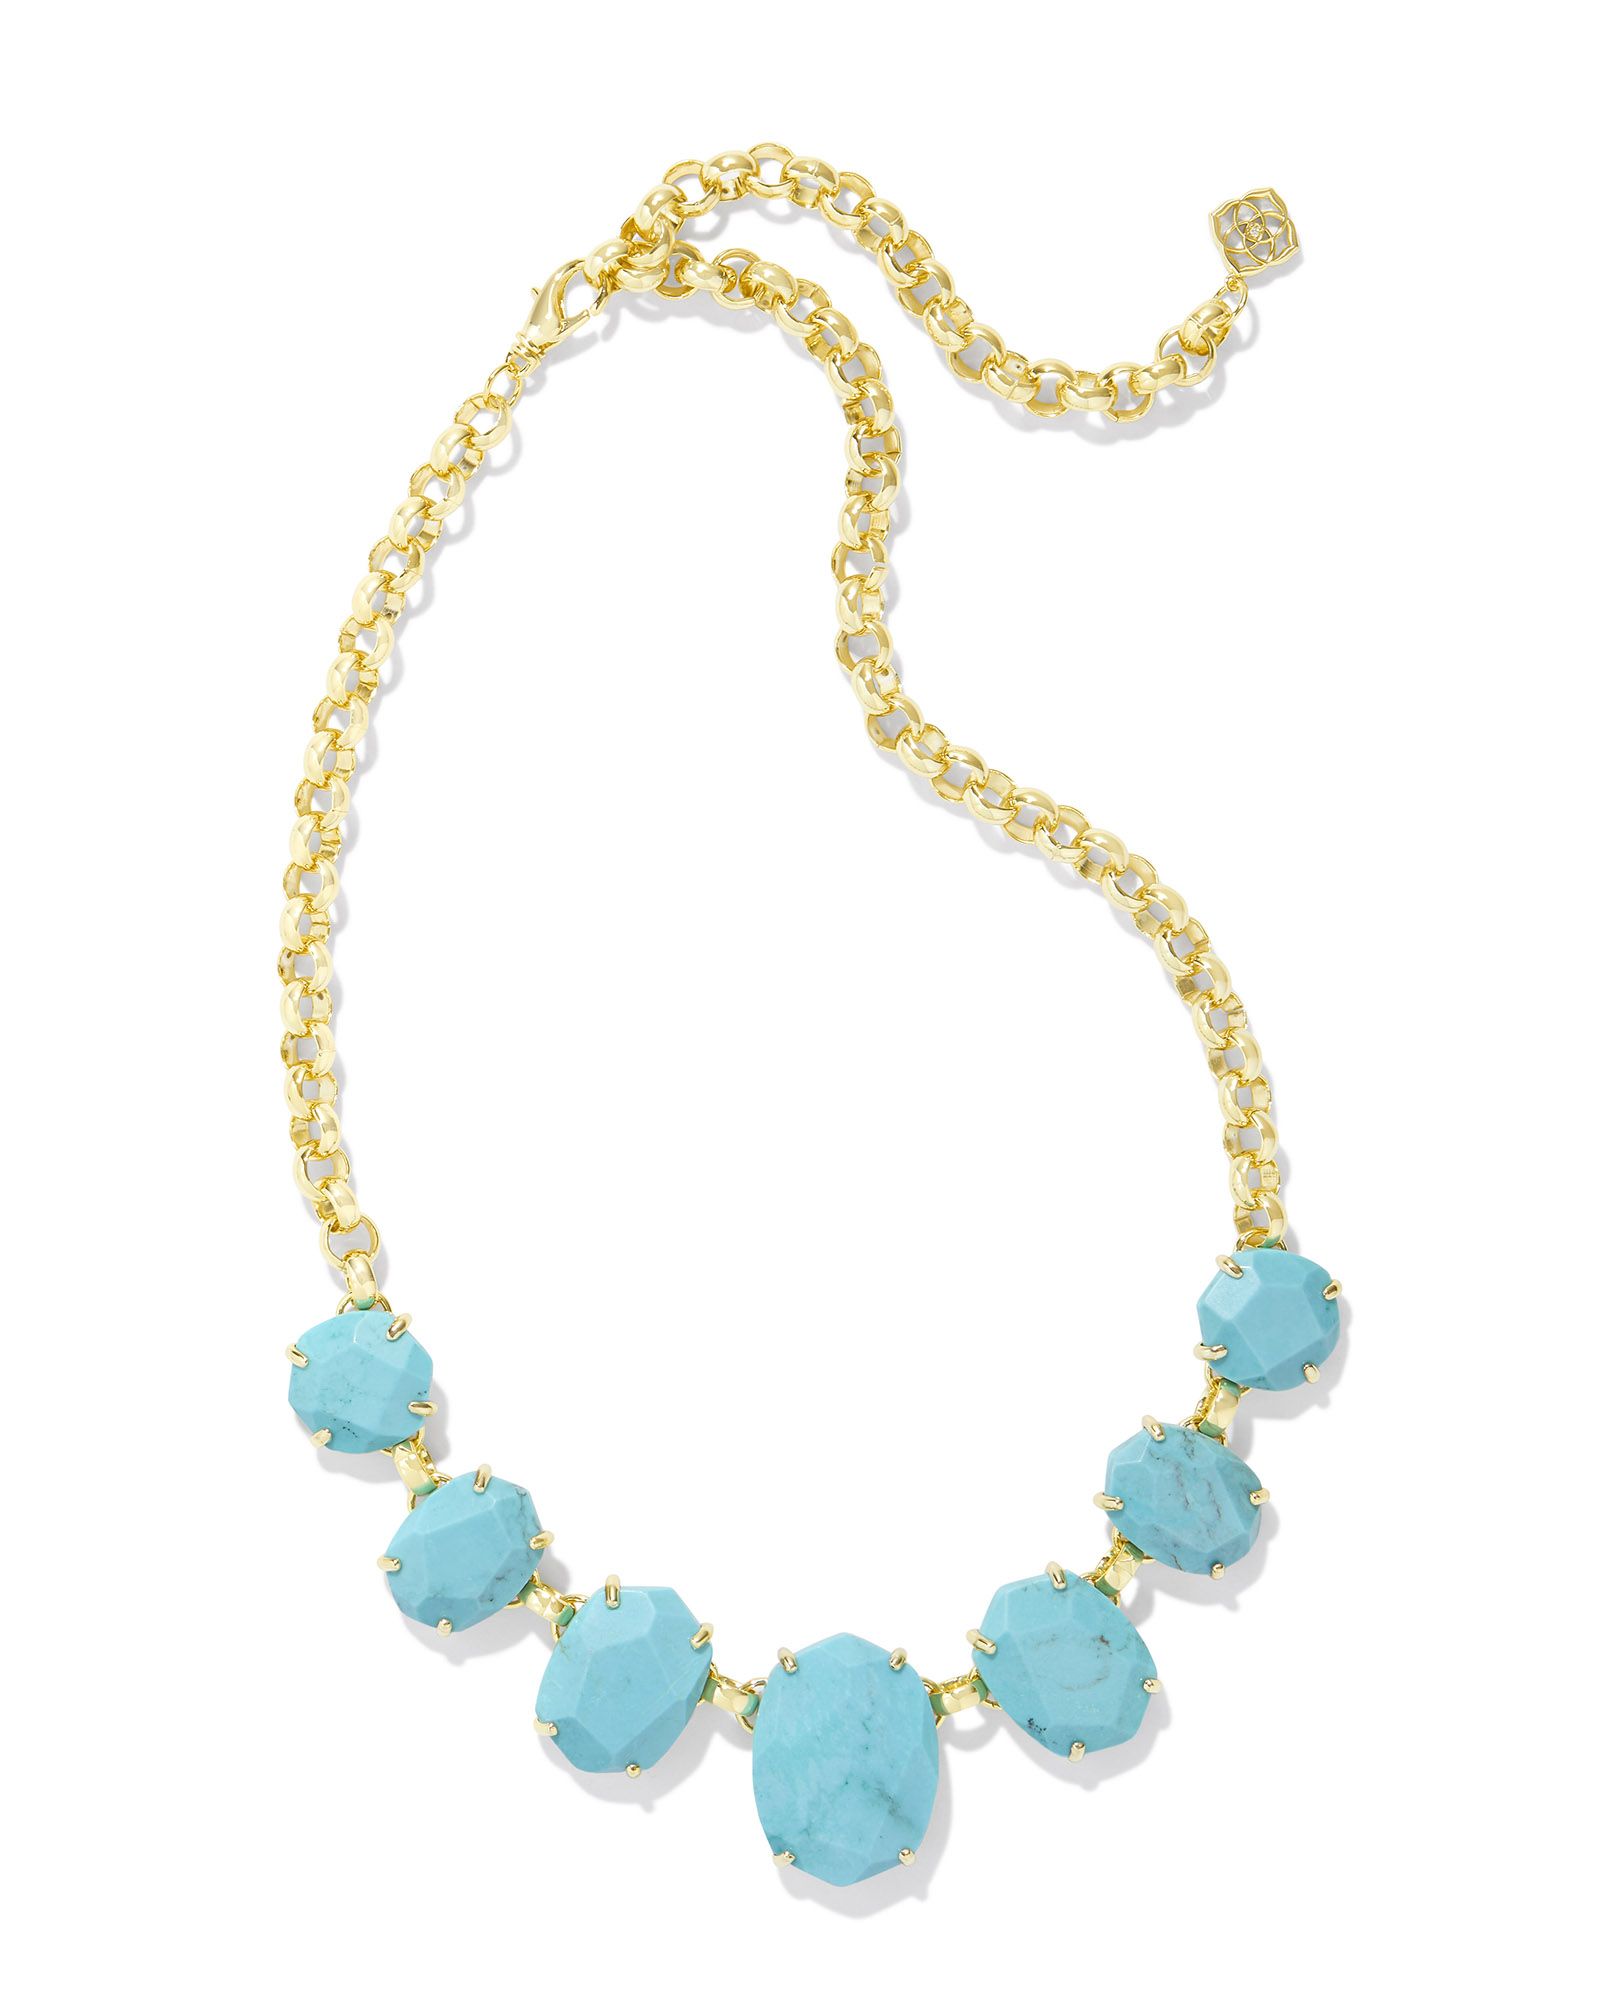 Daphne Gold Statement Necklace in Variegated Turquoise Magnesite | Kendra Scott | Kendra Scott